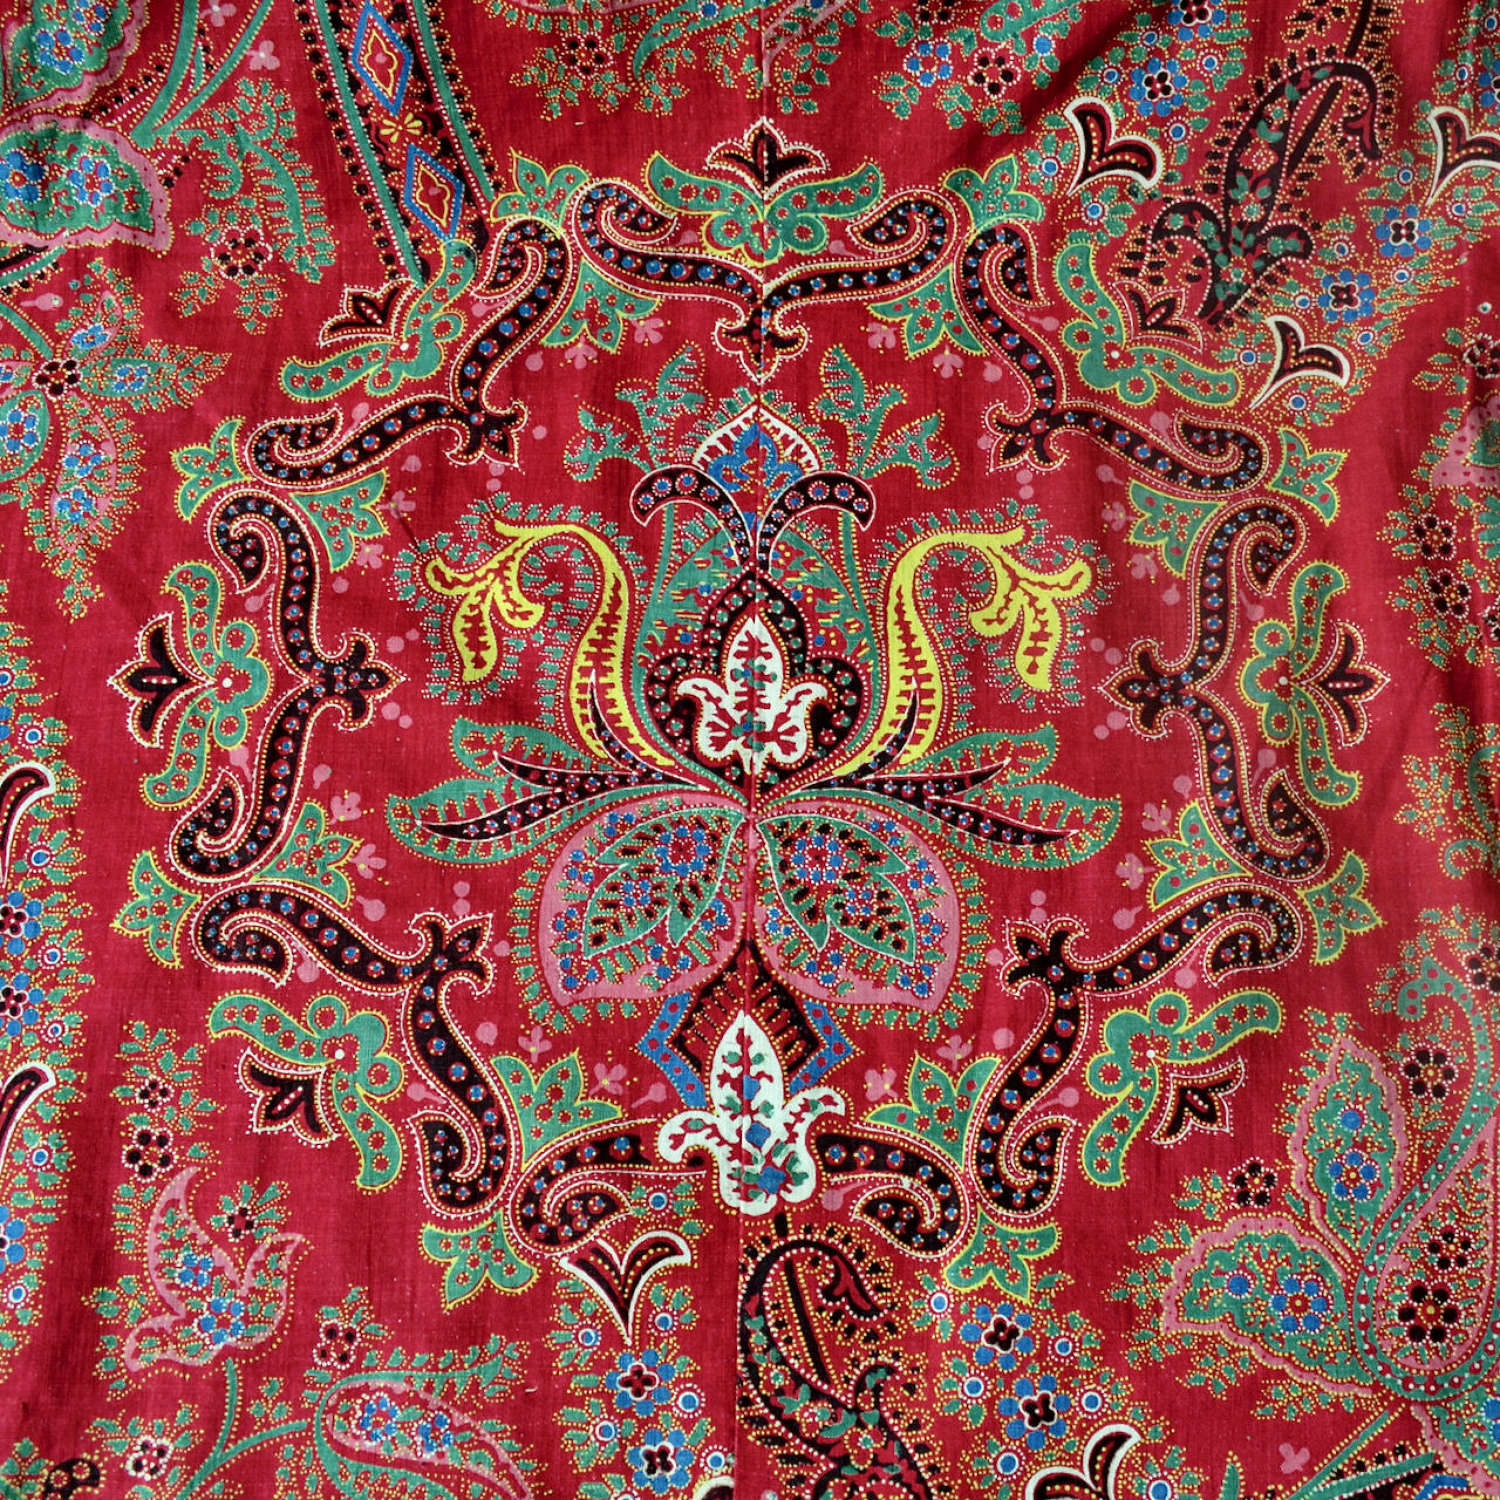 Large Paisley Curtain French 19th Century